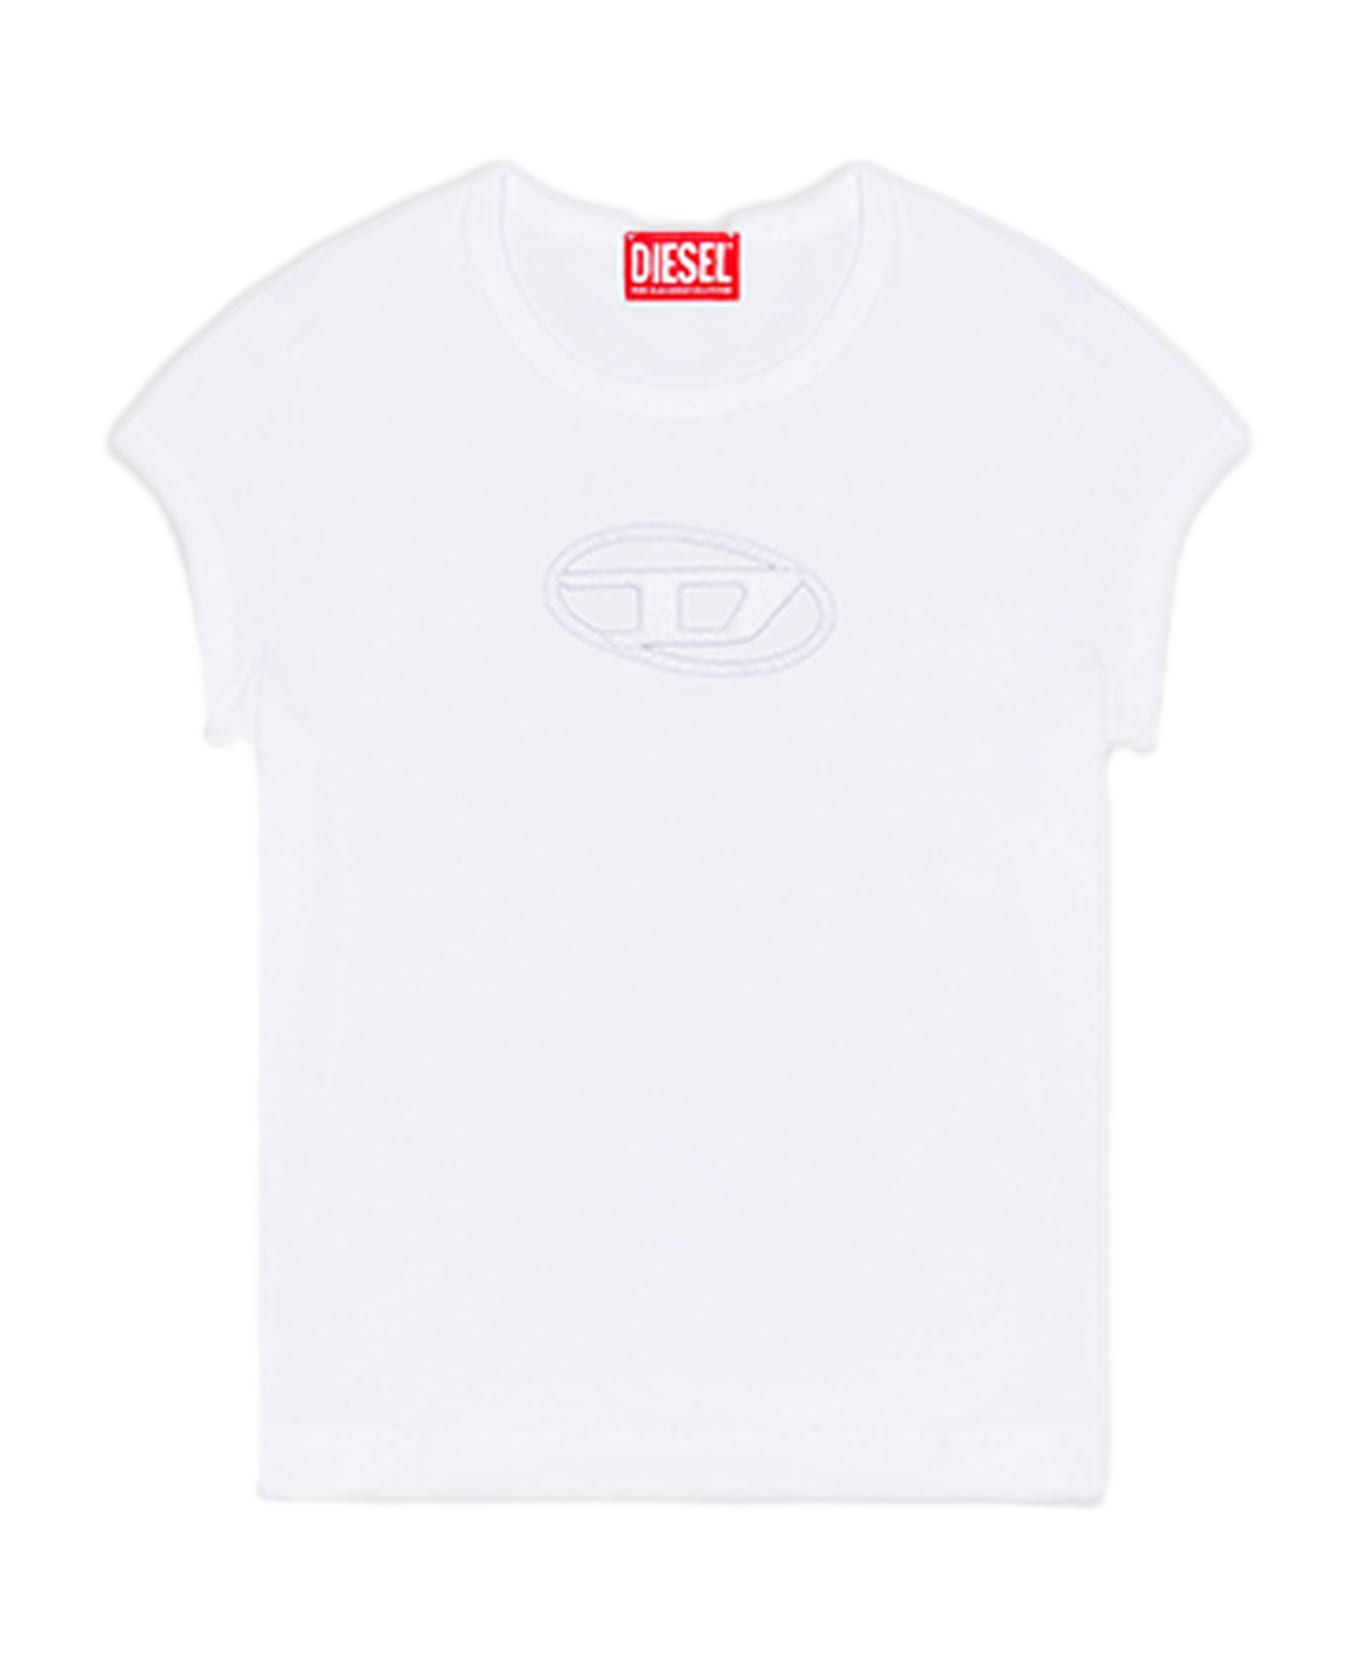 Diesel T-angie White cotton t-shirt with oval-D embroidery - T Angie - Bianco